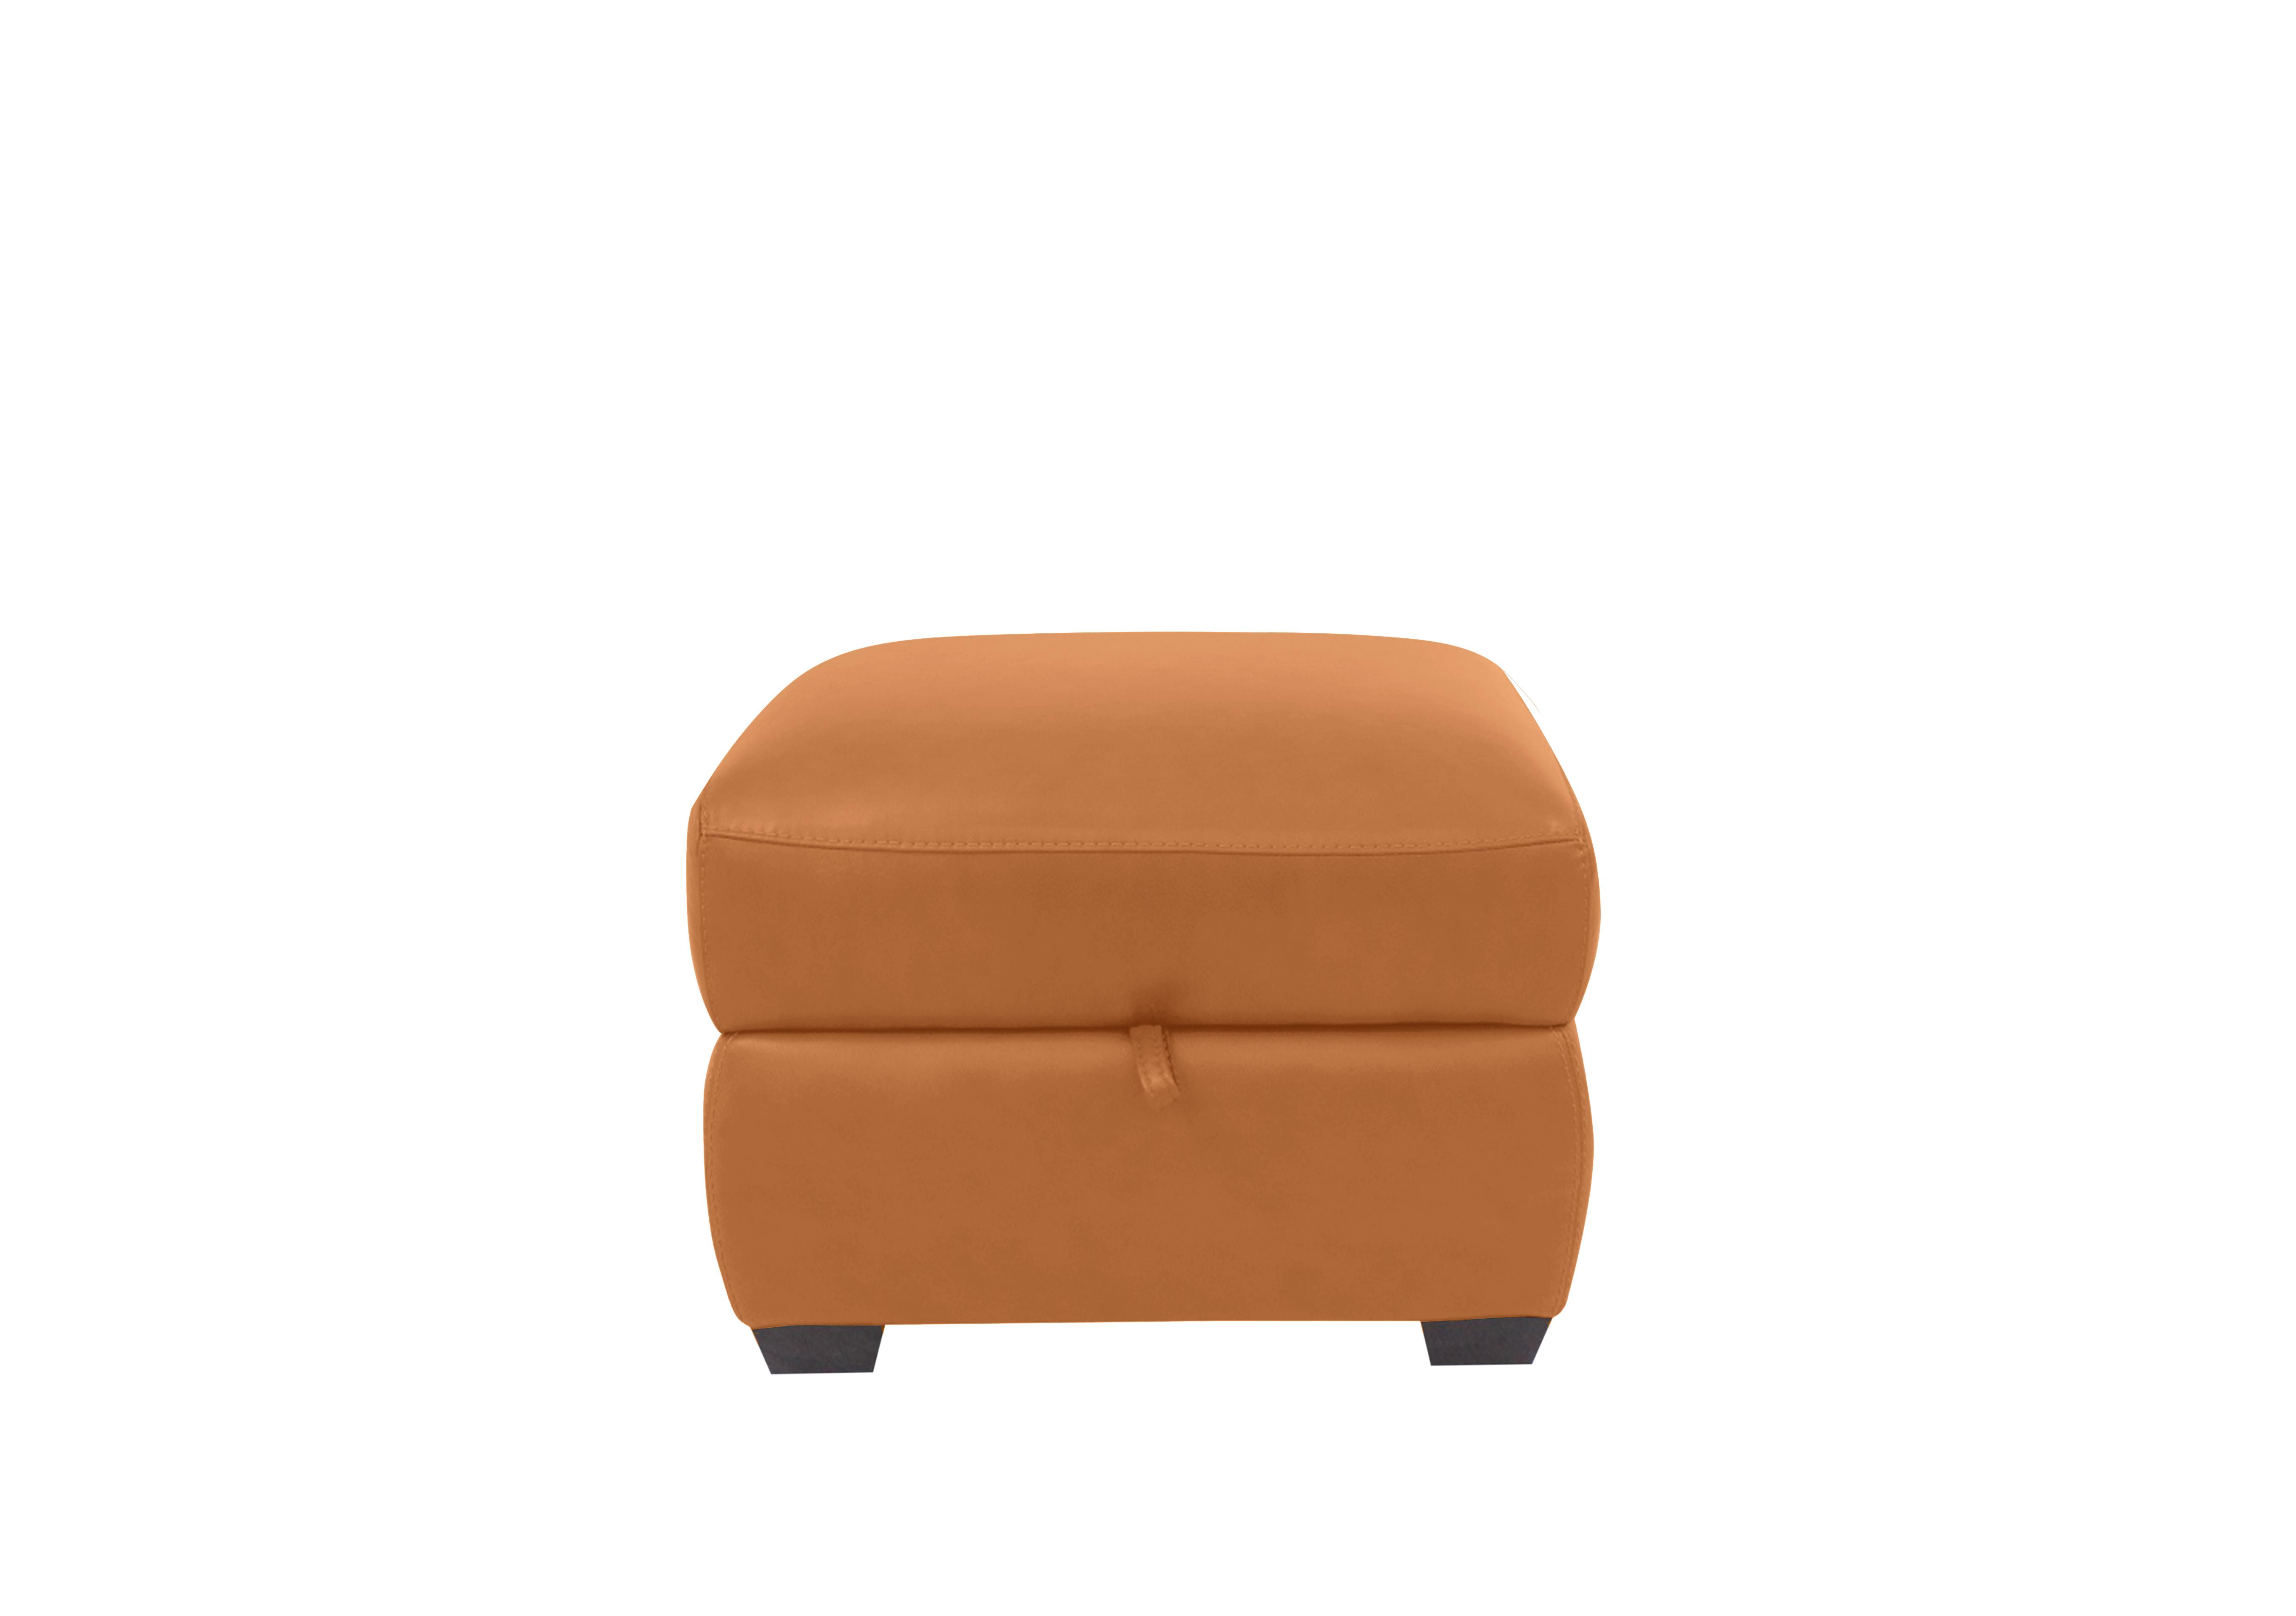 Cozee Leather Storage Stool in Bv-335e Honey Yellow on Furniture Village